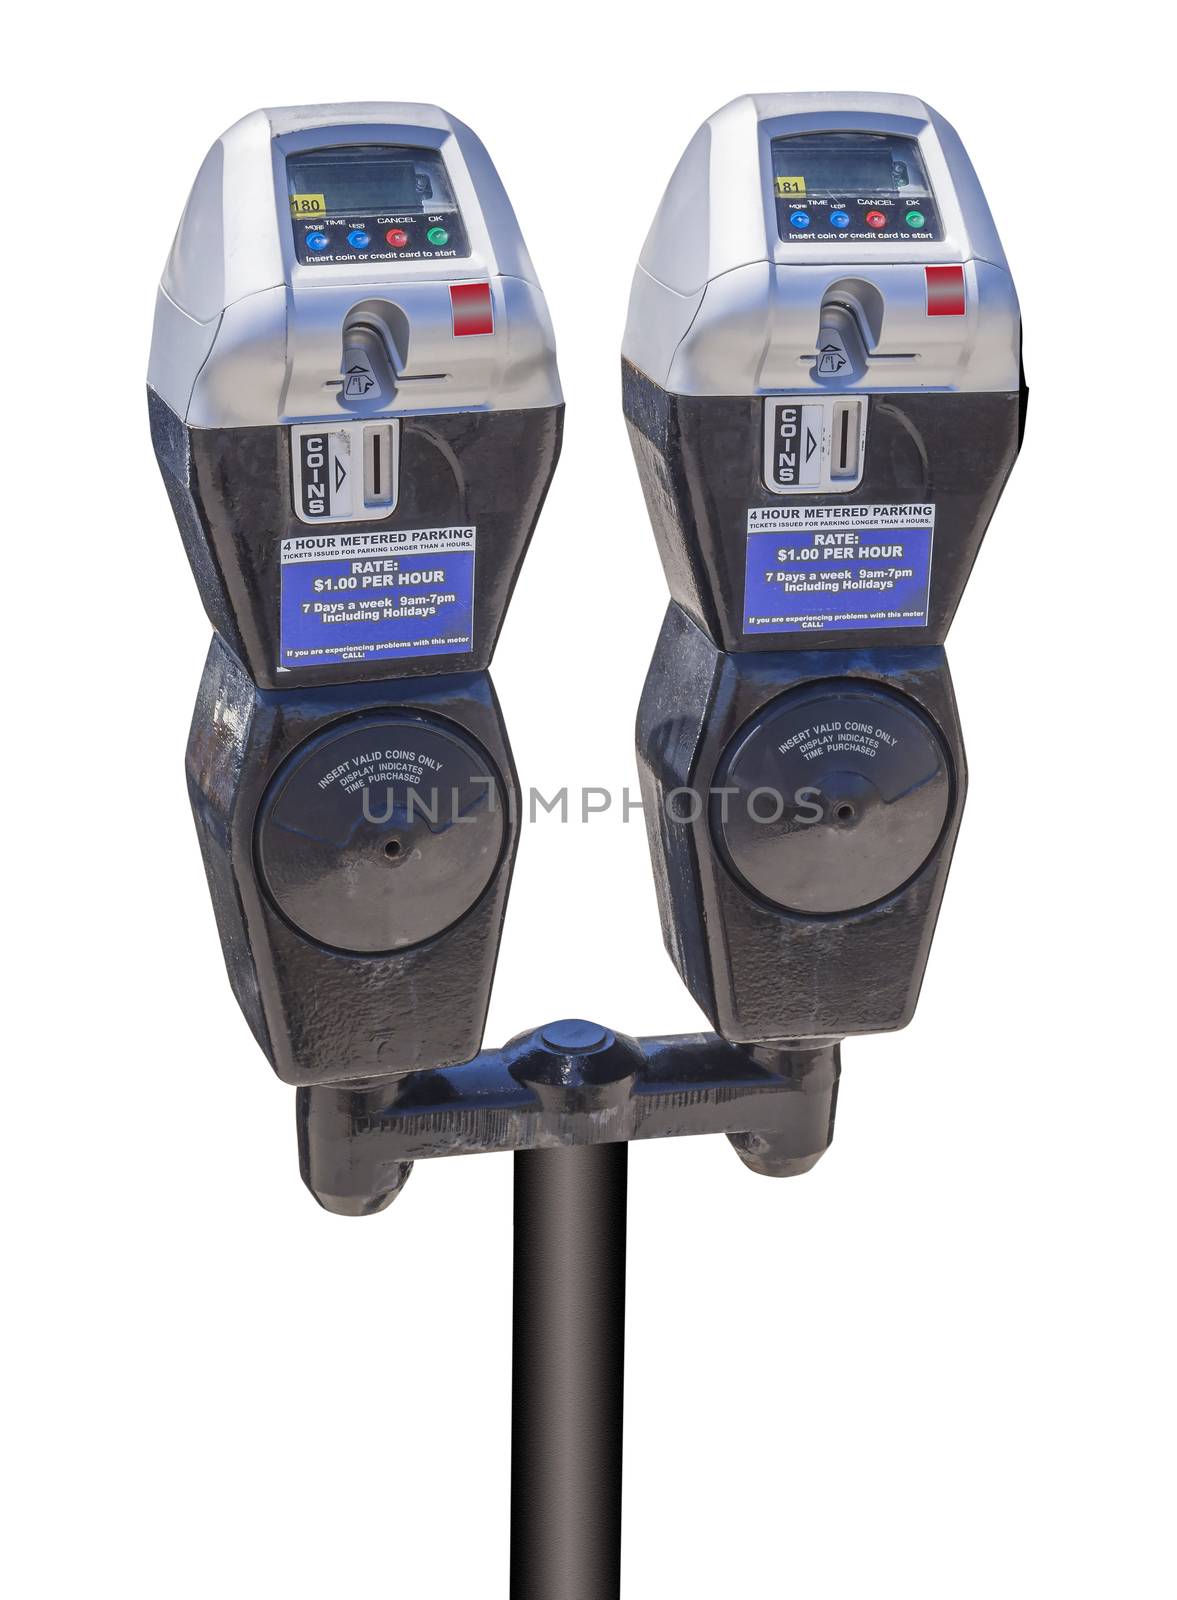 Parking meters that accept credit cards, isolated